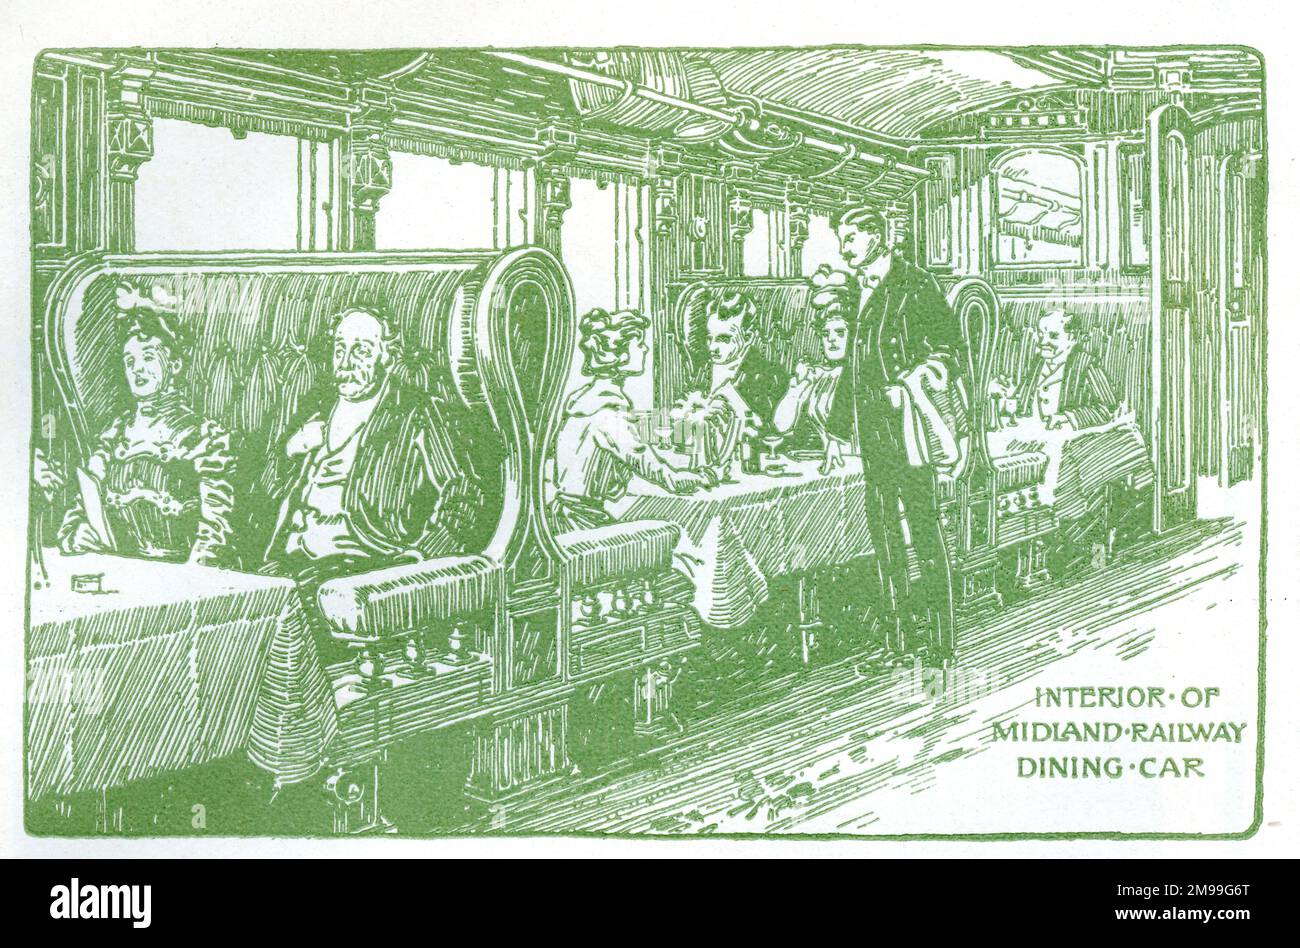 Interior of a Midland Railway Dining Car, with passengers. Stock Photo